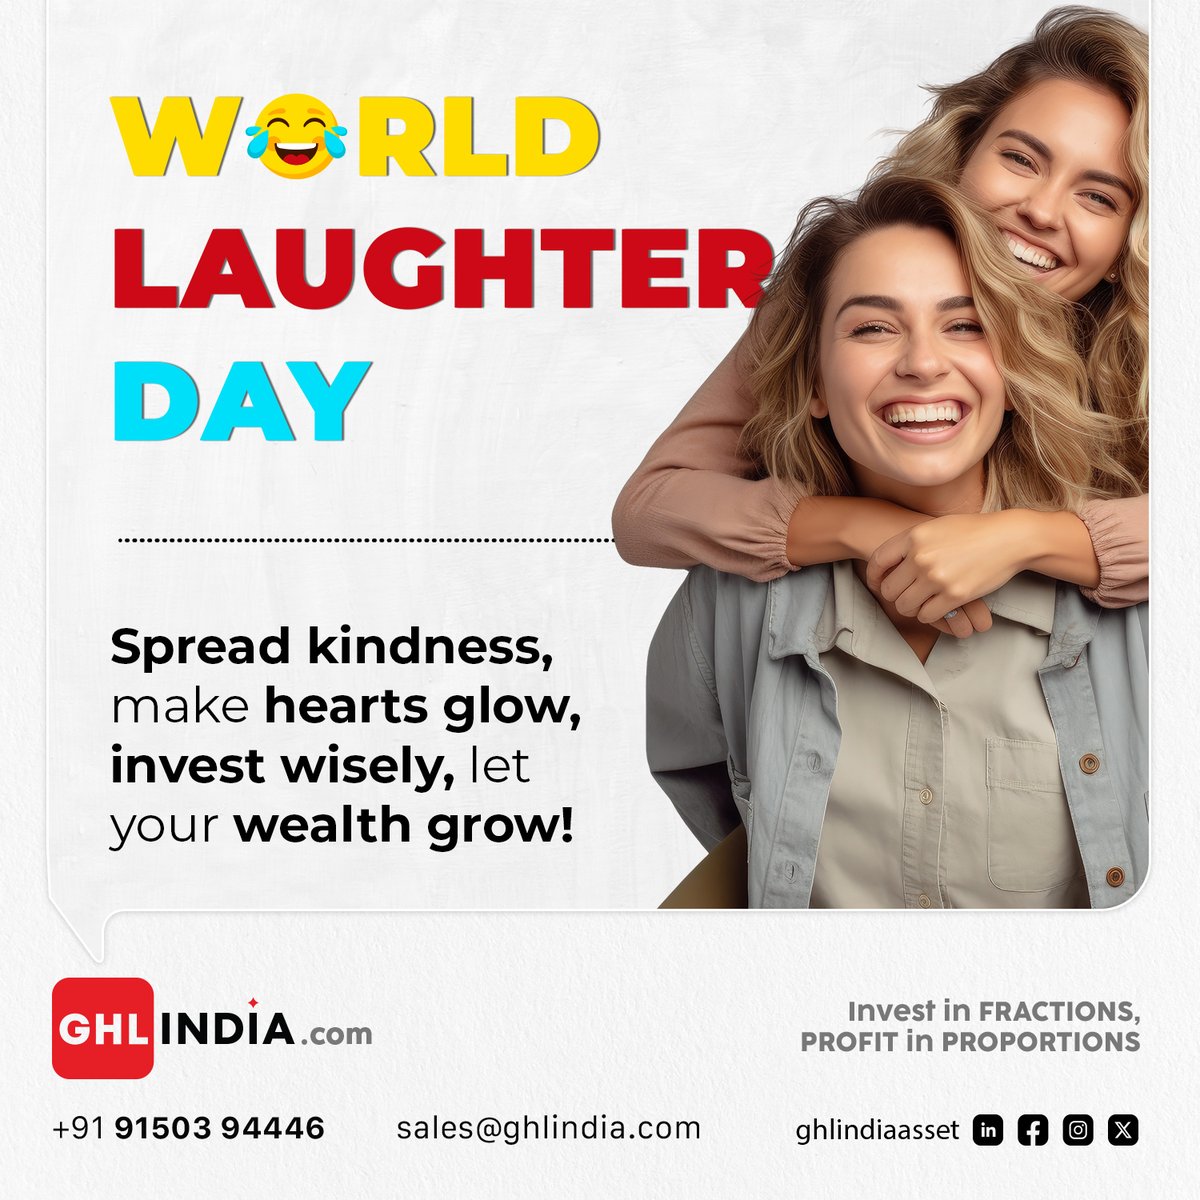 Spread smiles like confetti!
Happy World Laughter Day! 😀

#investment #InvestSmart #investmentopportunities #investor #Invest #IncomeOpportunity #incomestreams #passiveincome #PassiveIncomeJourney #wealthbuilding #wealthcreation #wealthmanagement #wealth #WorldLaughterDay